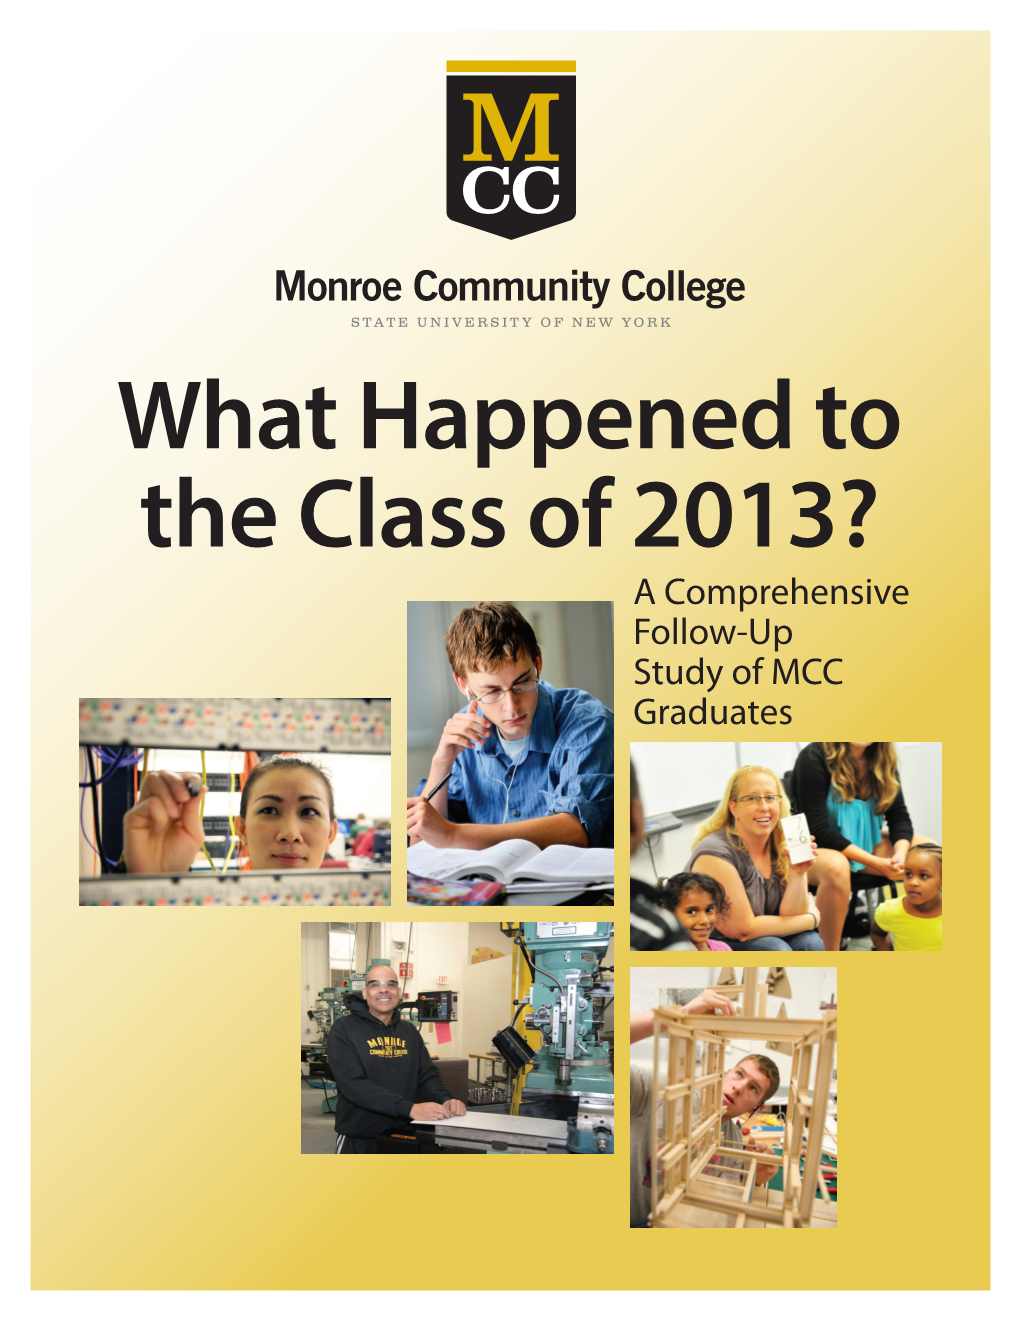 What Happened to the Class of 2013? a Comprehensive Follow-Up Study of MCC Graduates FOLLOW-UP STUDY of 2013 GRADUATES Table of Contents